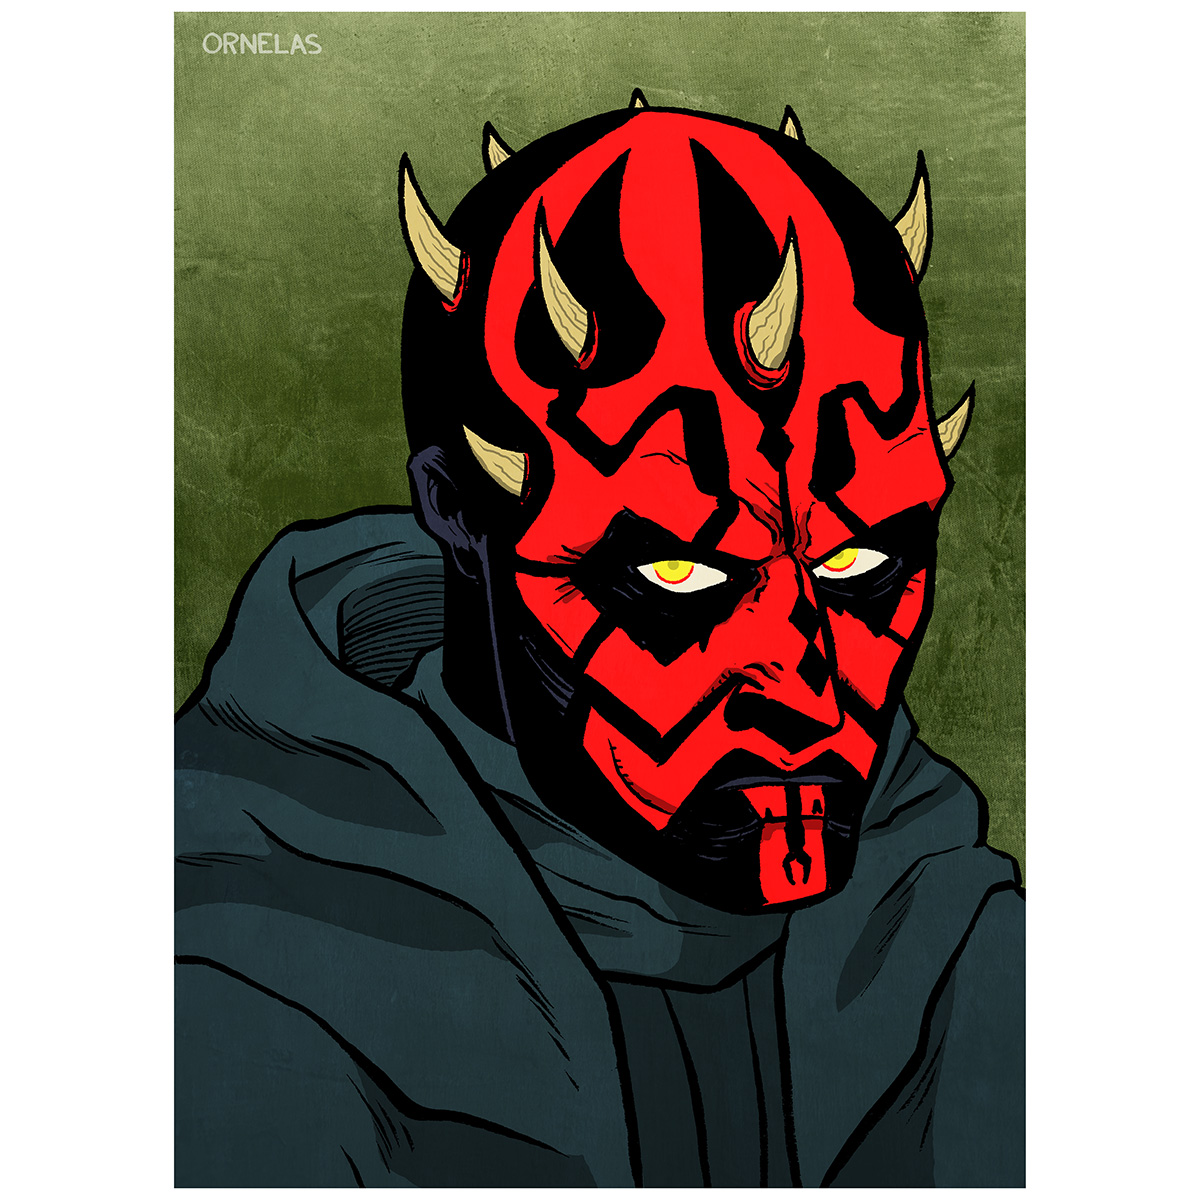 May The Third Be With You #BuyOrnelasArt #commissionsopen #comicbooks #comix #supportlocalartists #shopsmall #supportindieartists #starwarsart #maythe4thbewithyou #maythefourth #DarthMaul #SithLord